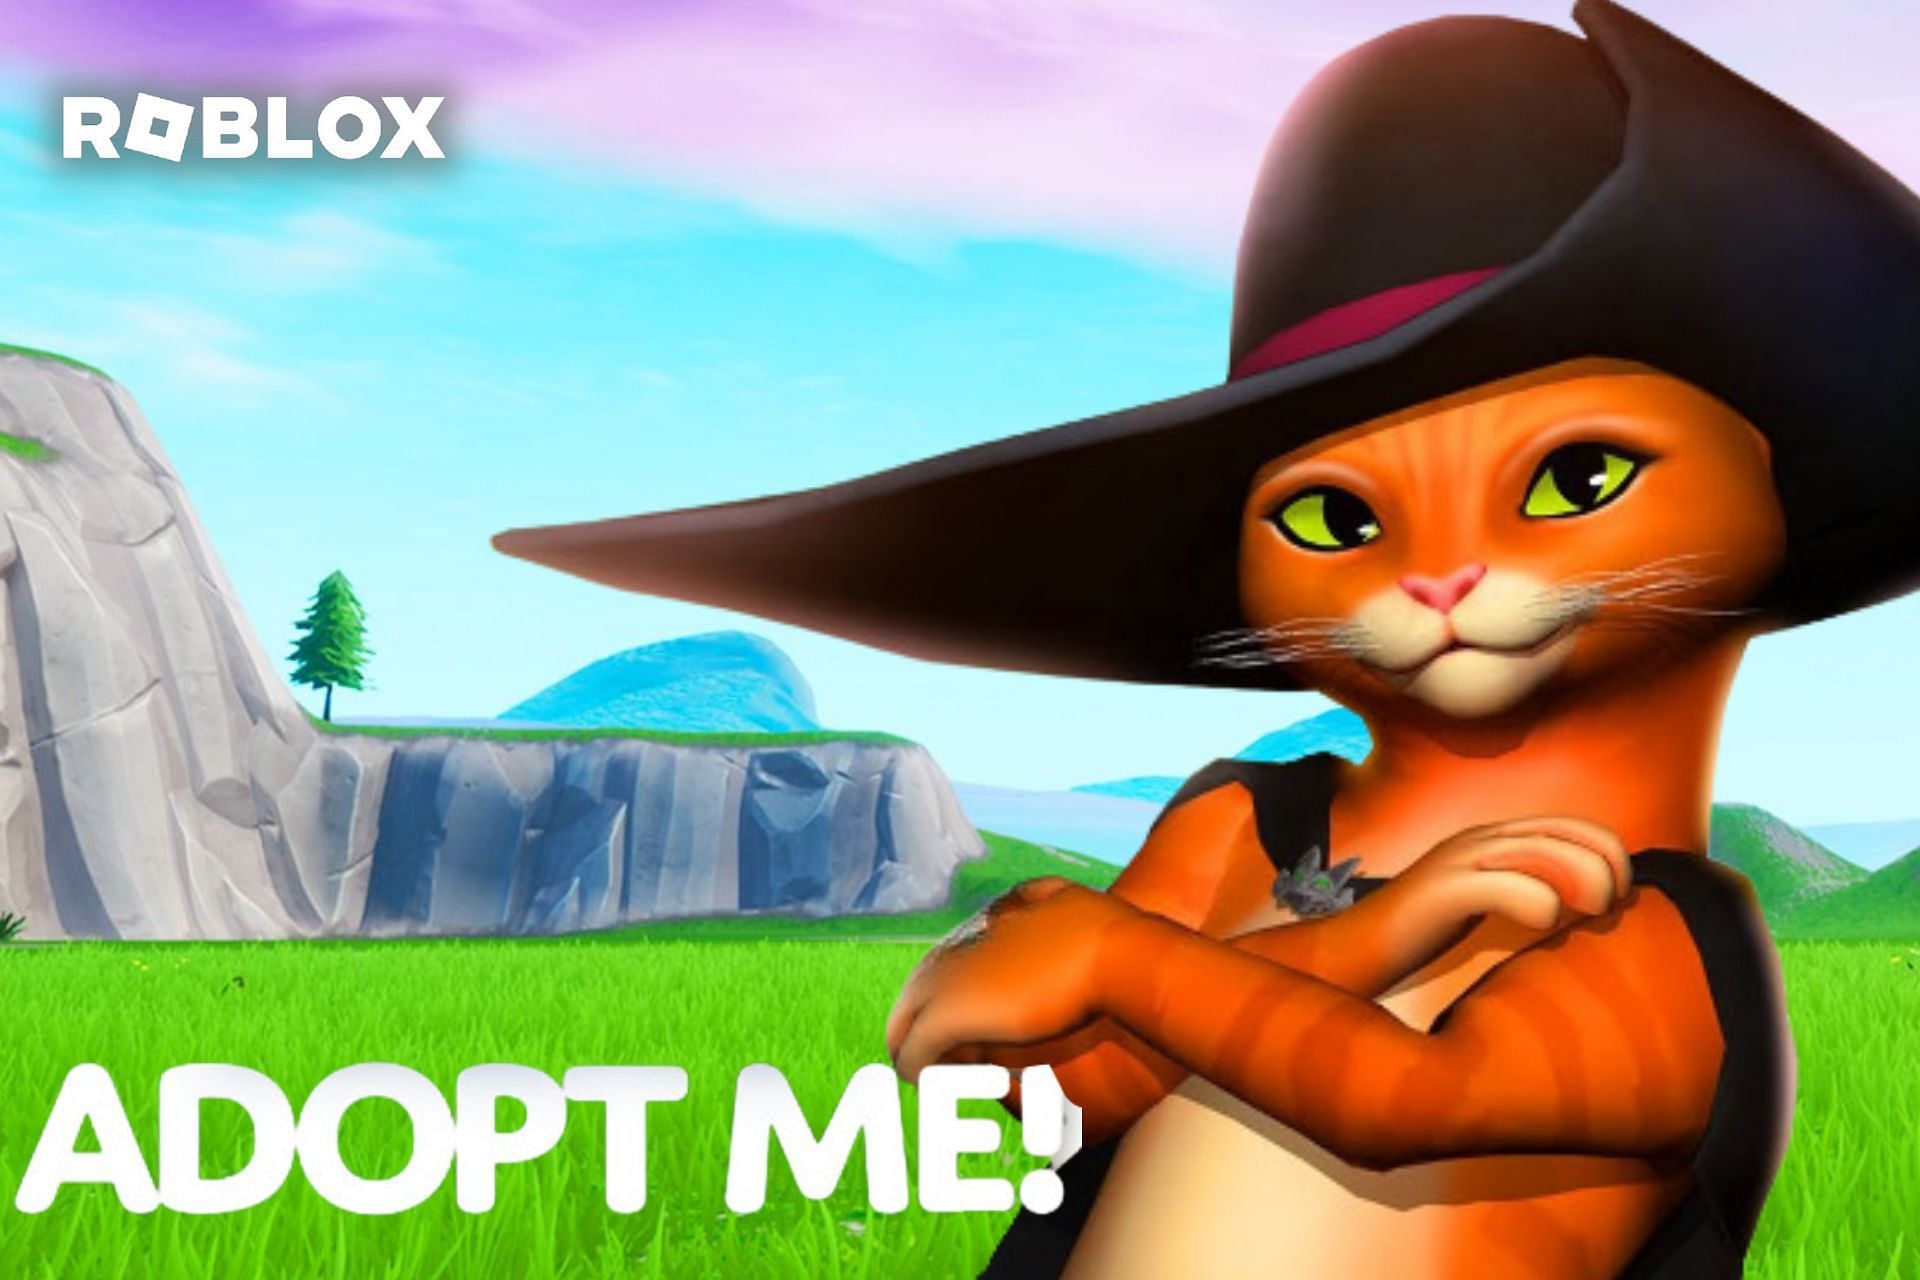 Famous animated character Puss in Boots to arrive in Roblox Adopt Me!